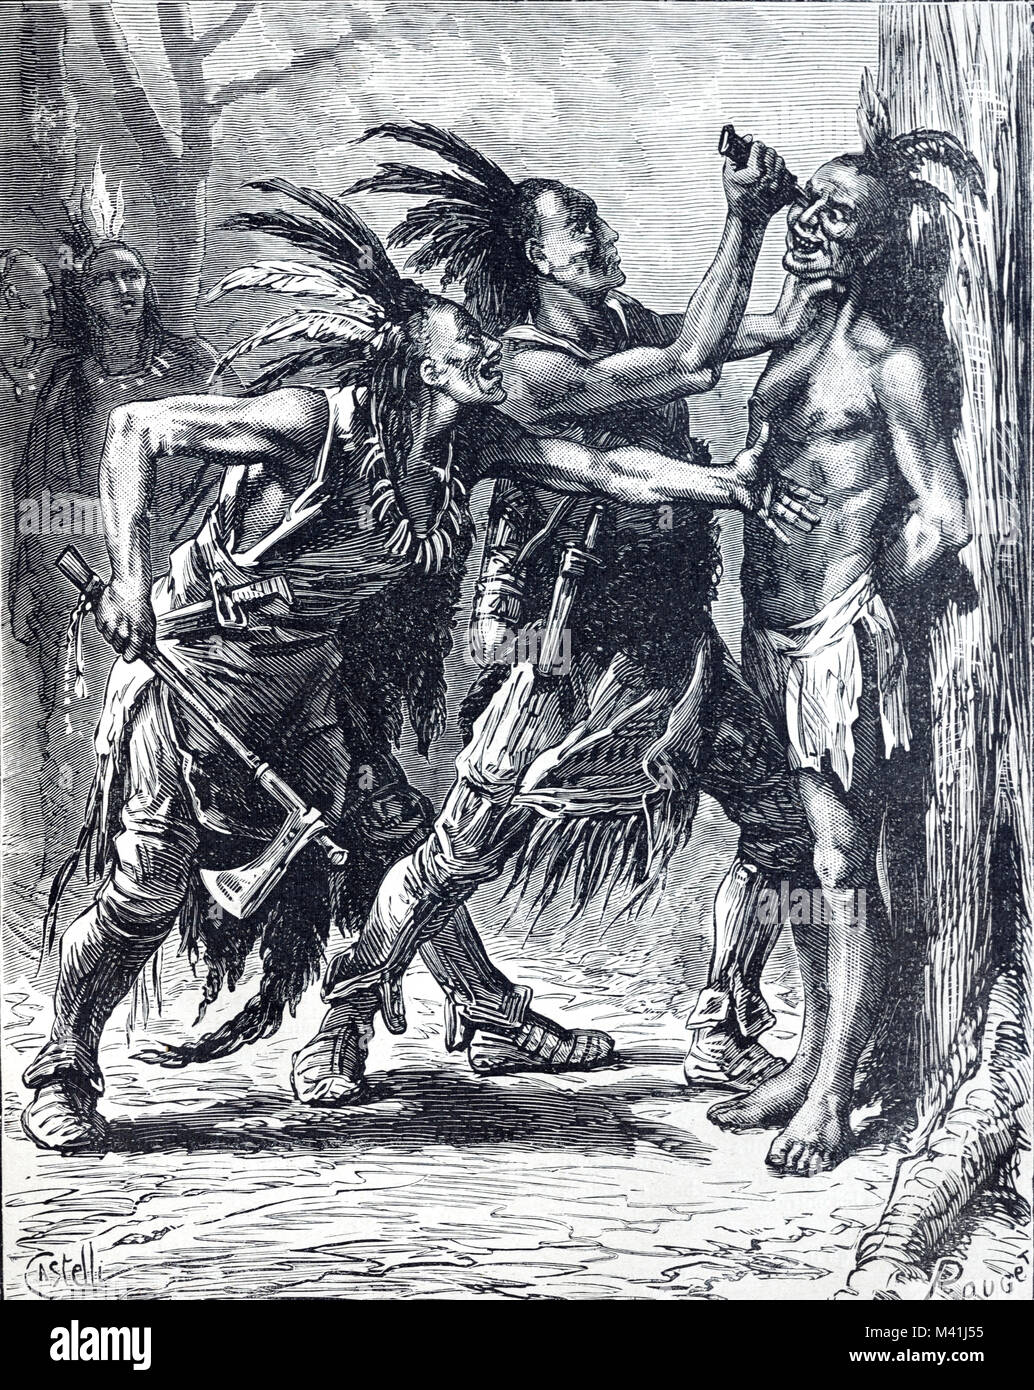 Flathead People or Native American Bitterroot Salish Blinding Rival in Flathead Nation in Montana, United States (Engraving 1879) Stock Photo